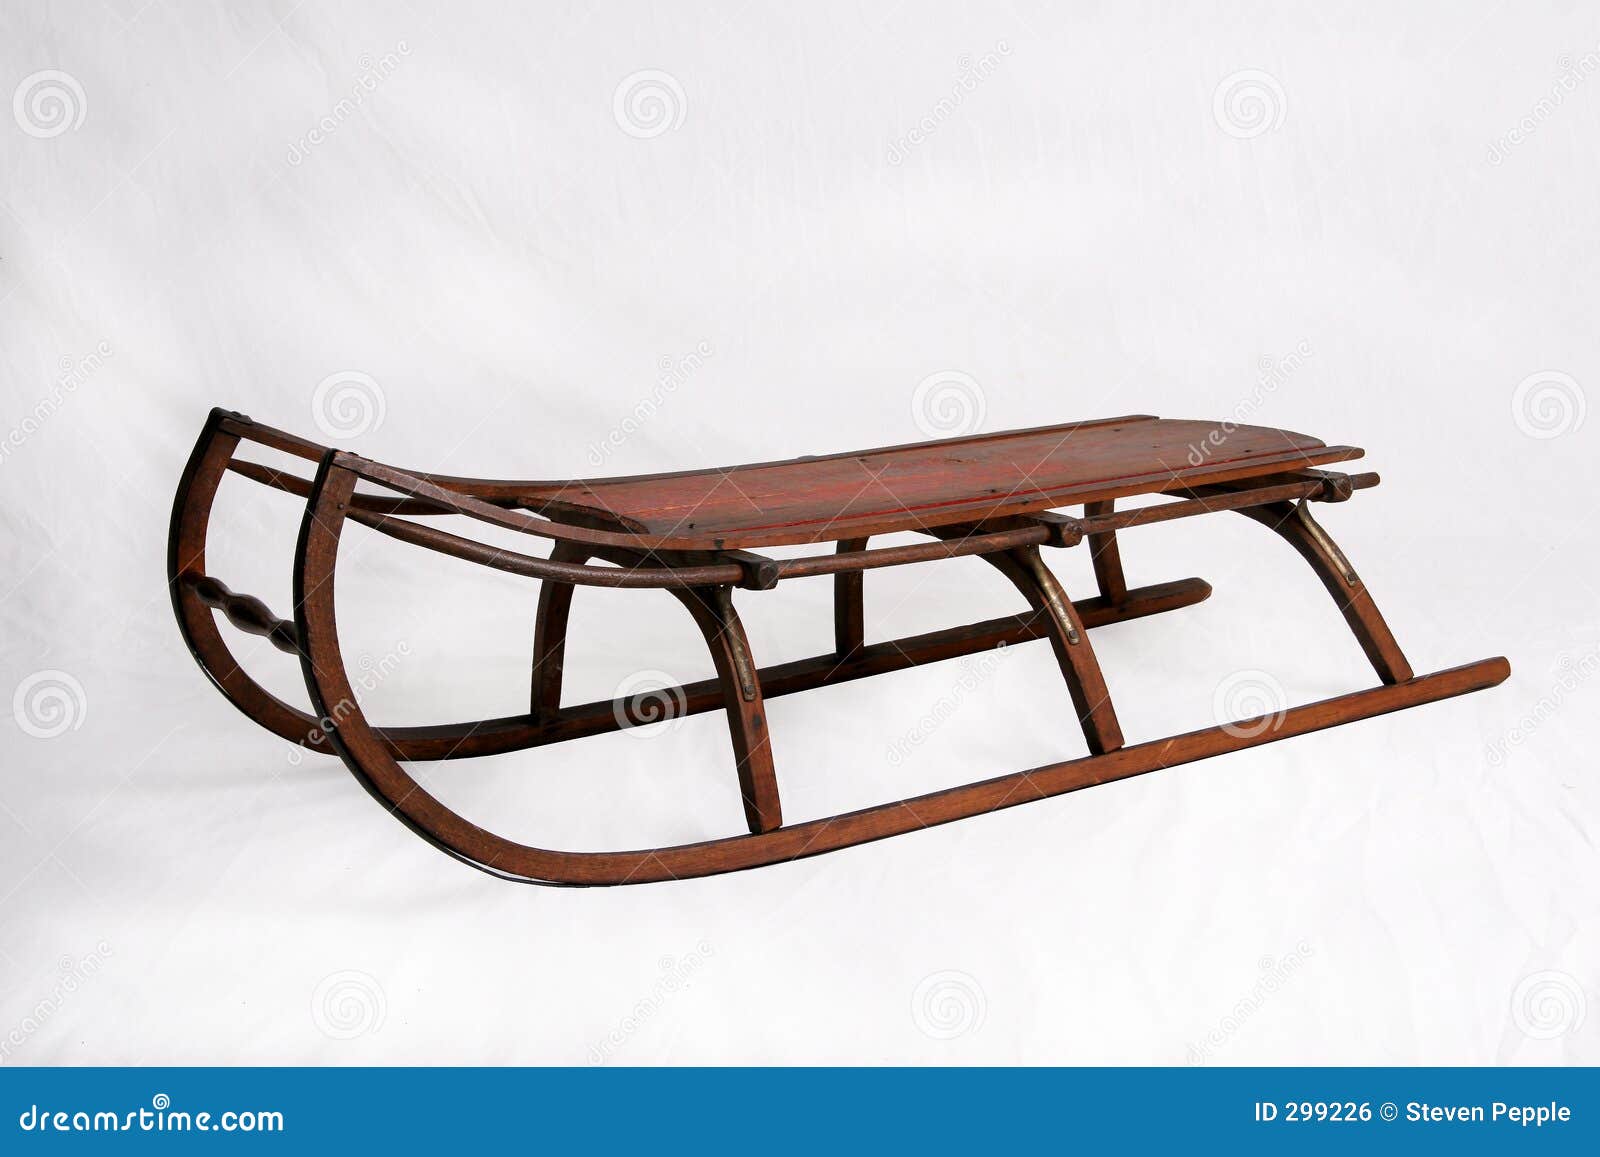 Antique Snow Sled Royalty Free Stock Image - Image: 299226